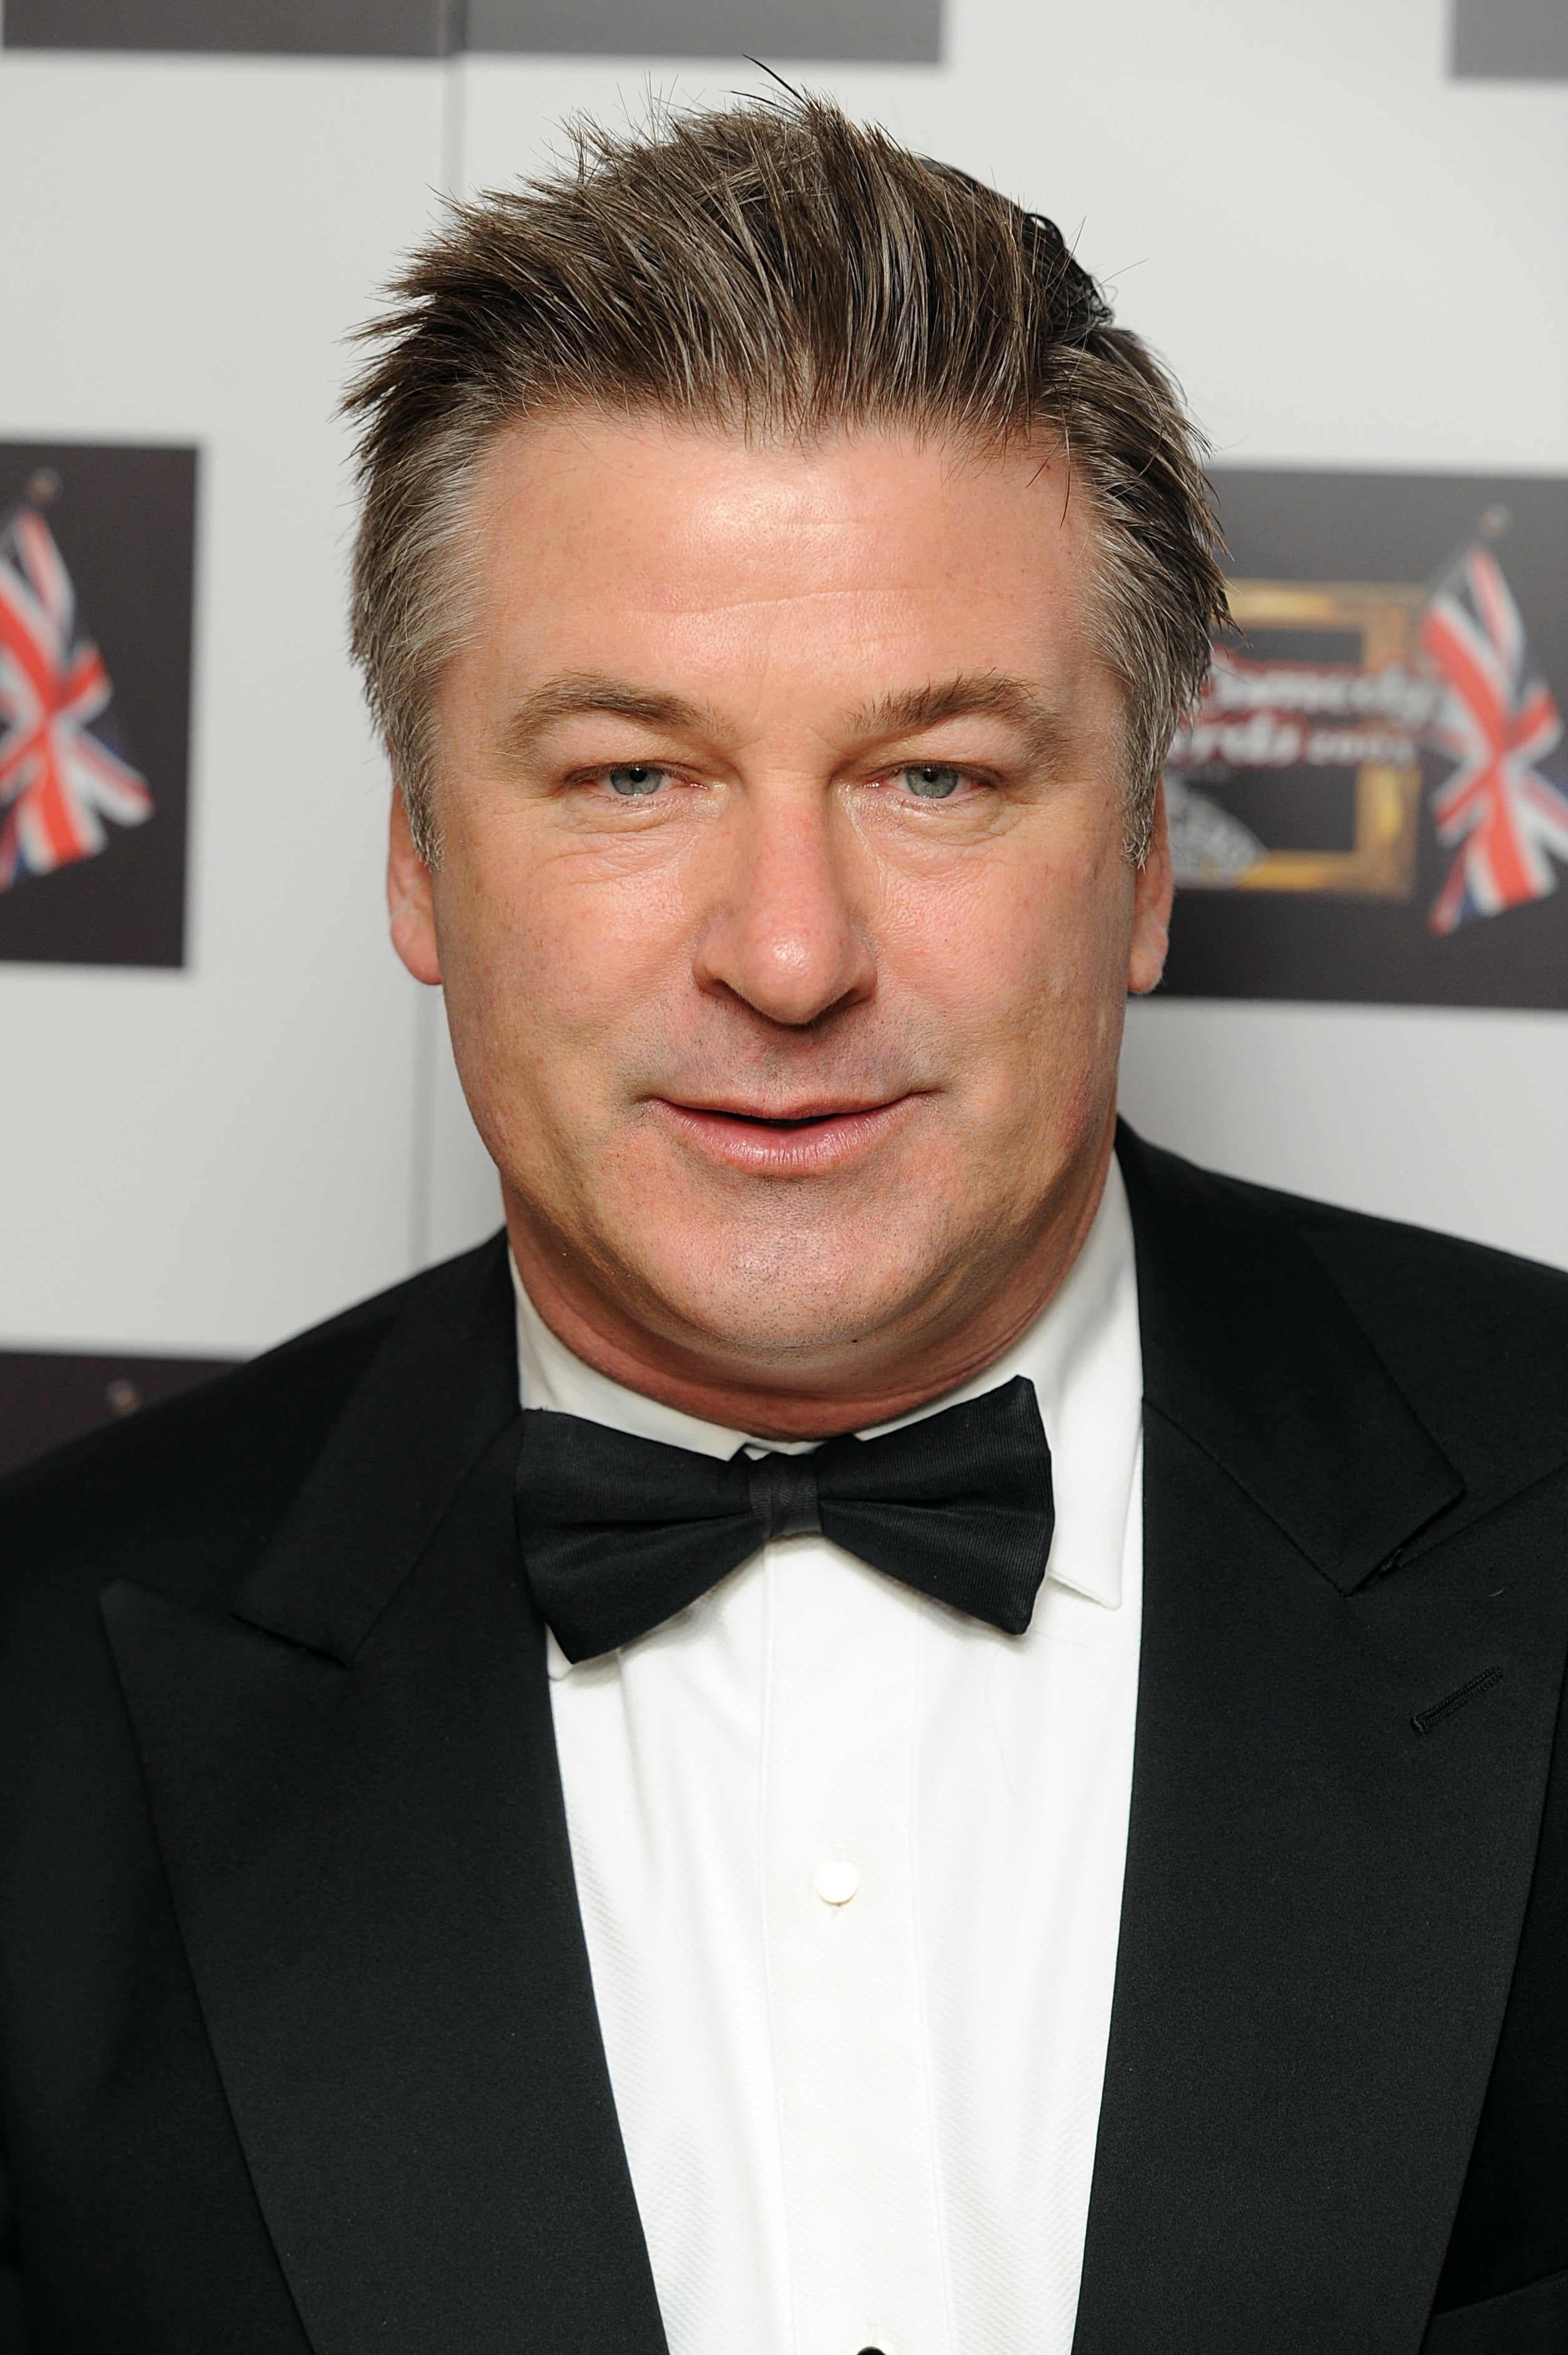 File dated 06/12/08 of Alec Baldwin who has said that his acting career may be over as he denied pulling the trigger in the fatal shooting of Halyna Hutchins on the set of Rust. The actor, 63, accidentally shot and killed cinematographer Hutchins when a prop gun he was holding went off during filming for the Western in New Mexico. Issue date: Friday December 3, 2021.